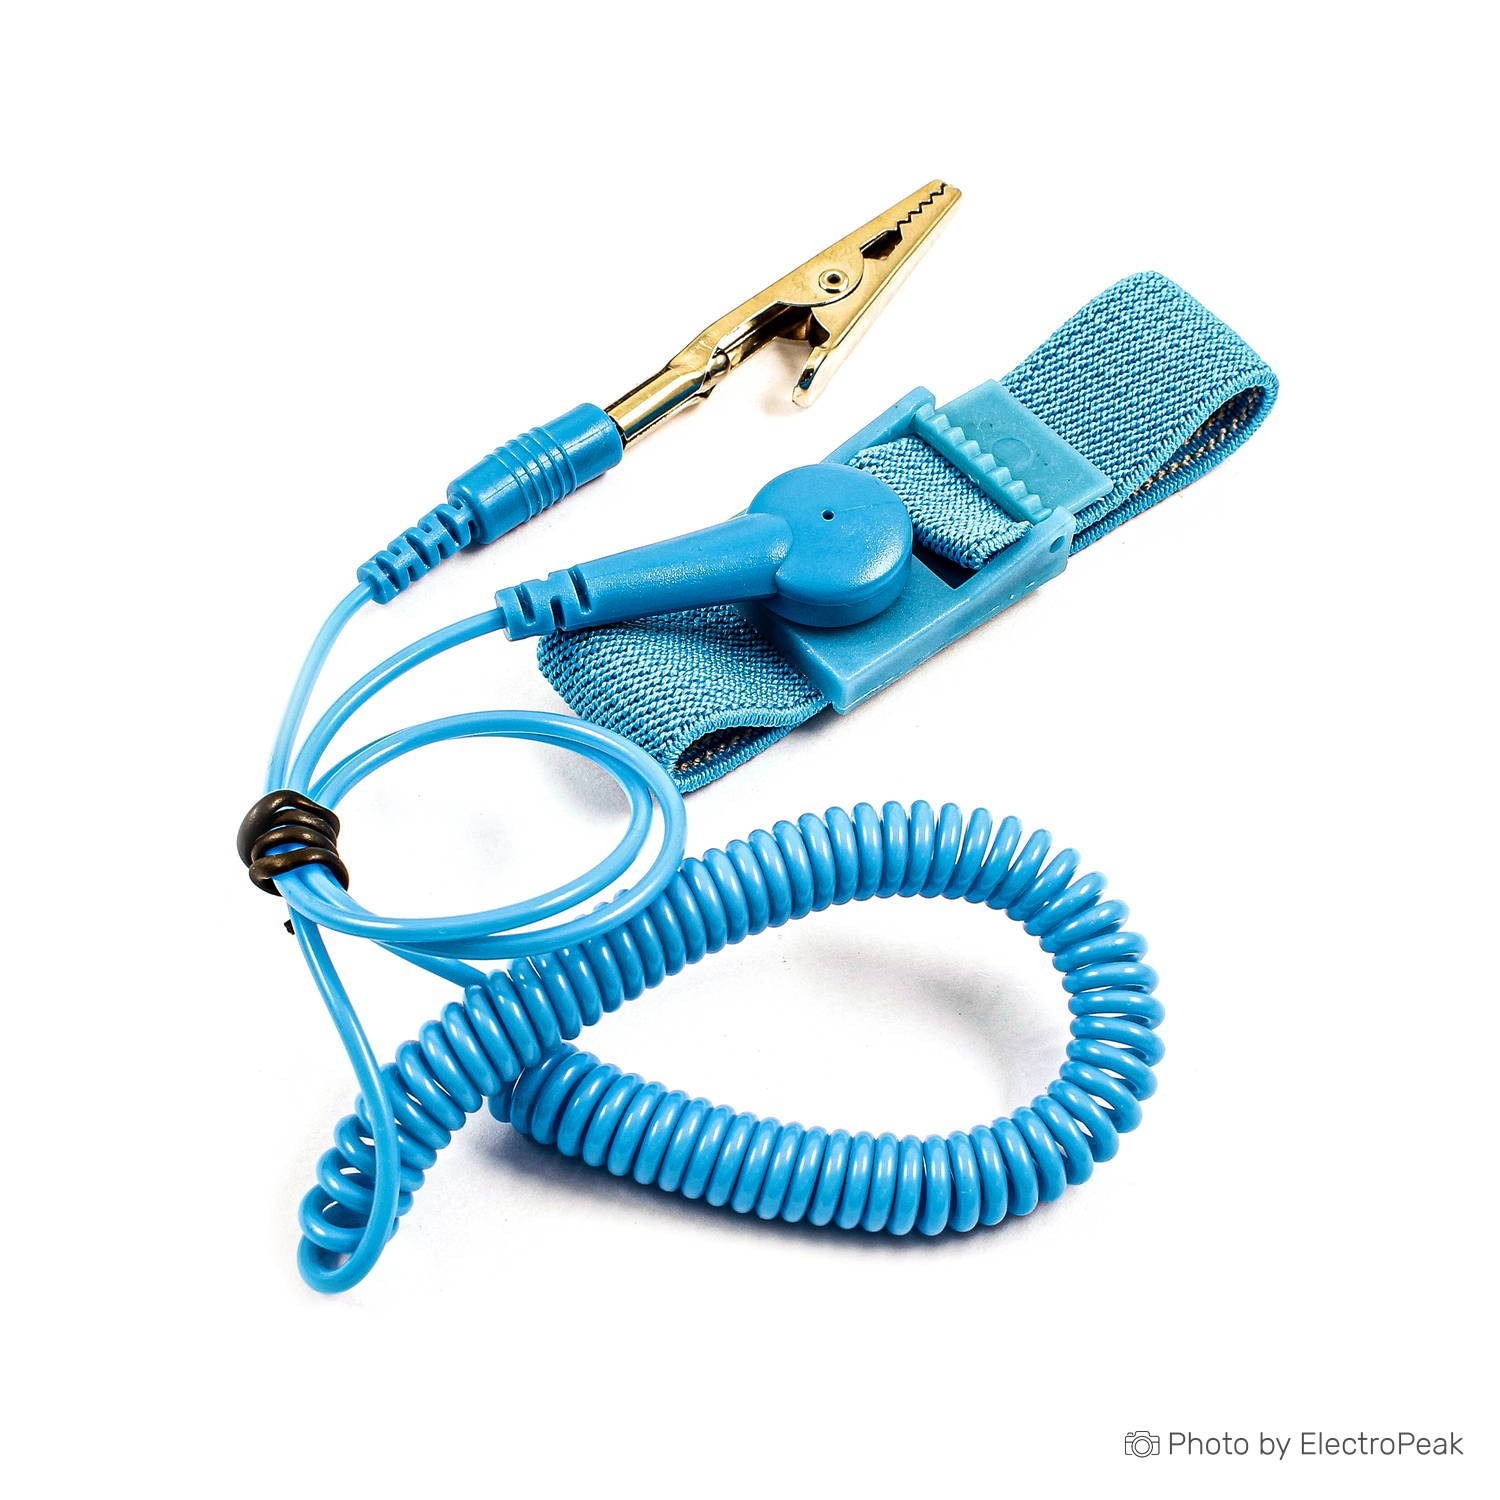 Anti Static Wrist Straps, Cordless Anti-Static Wrist Strap Discharge Band,  ESD Discharge Cable Band Wrist Strap-Blue